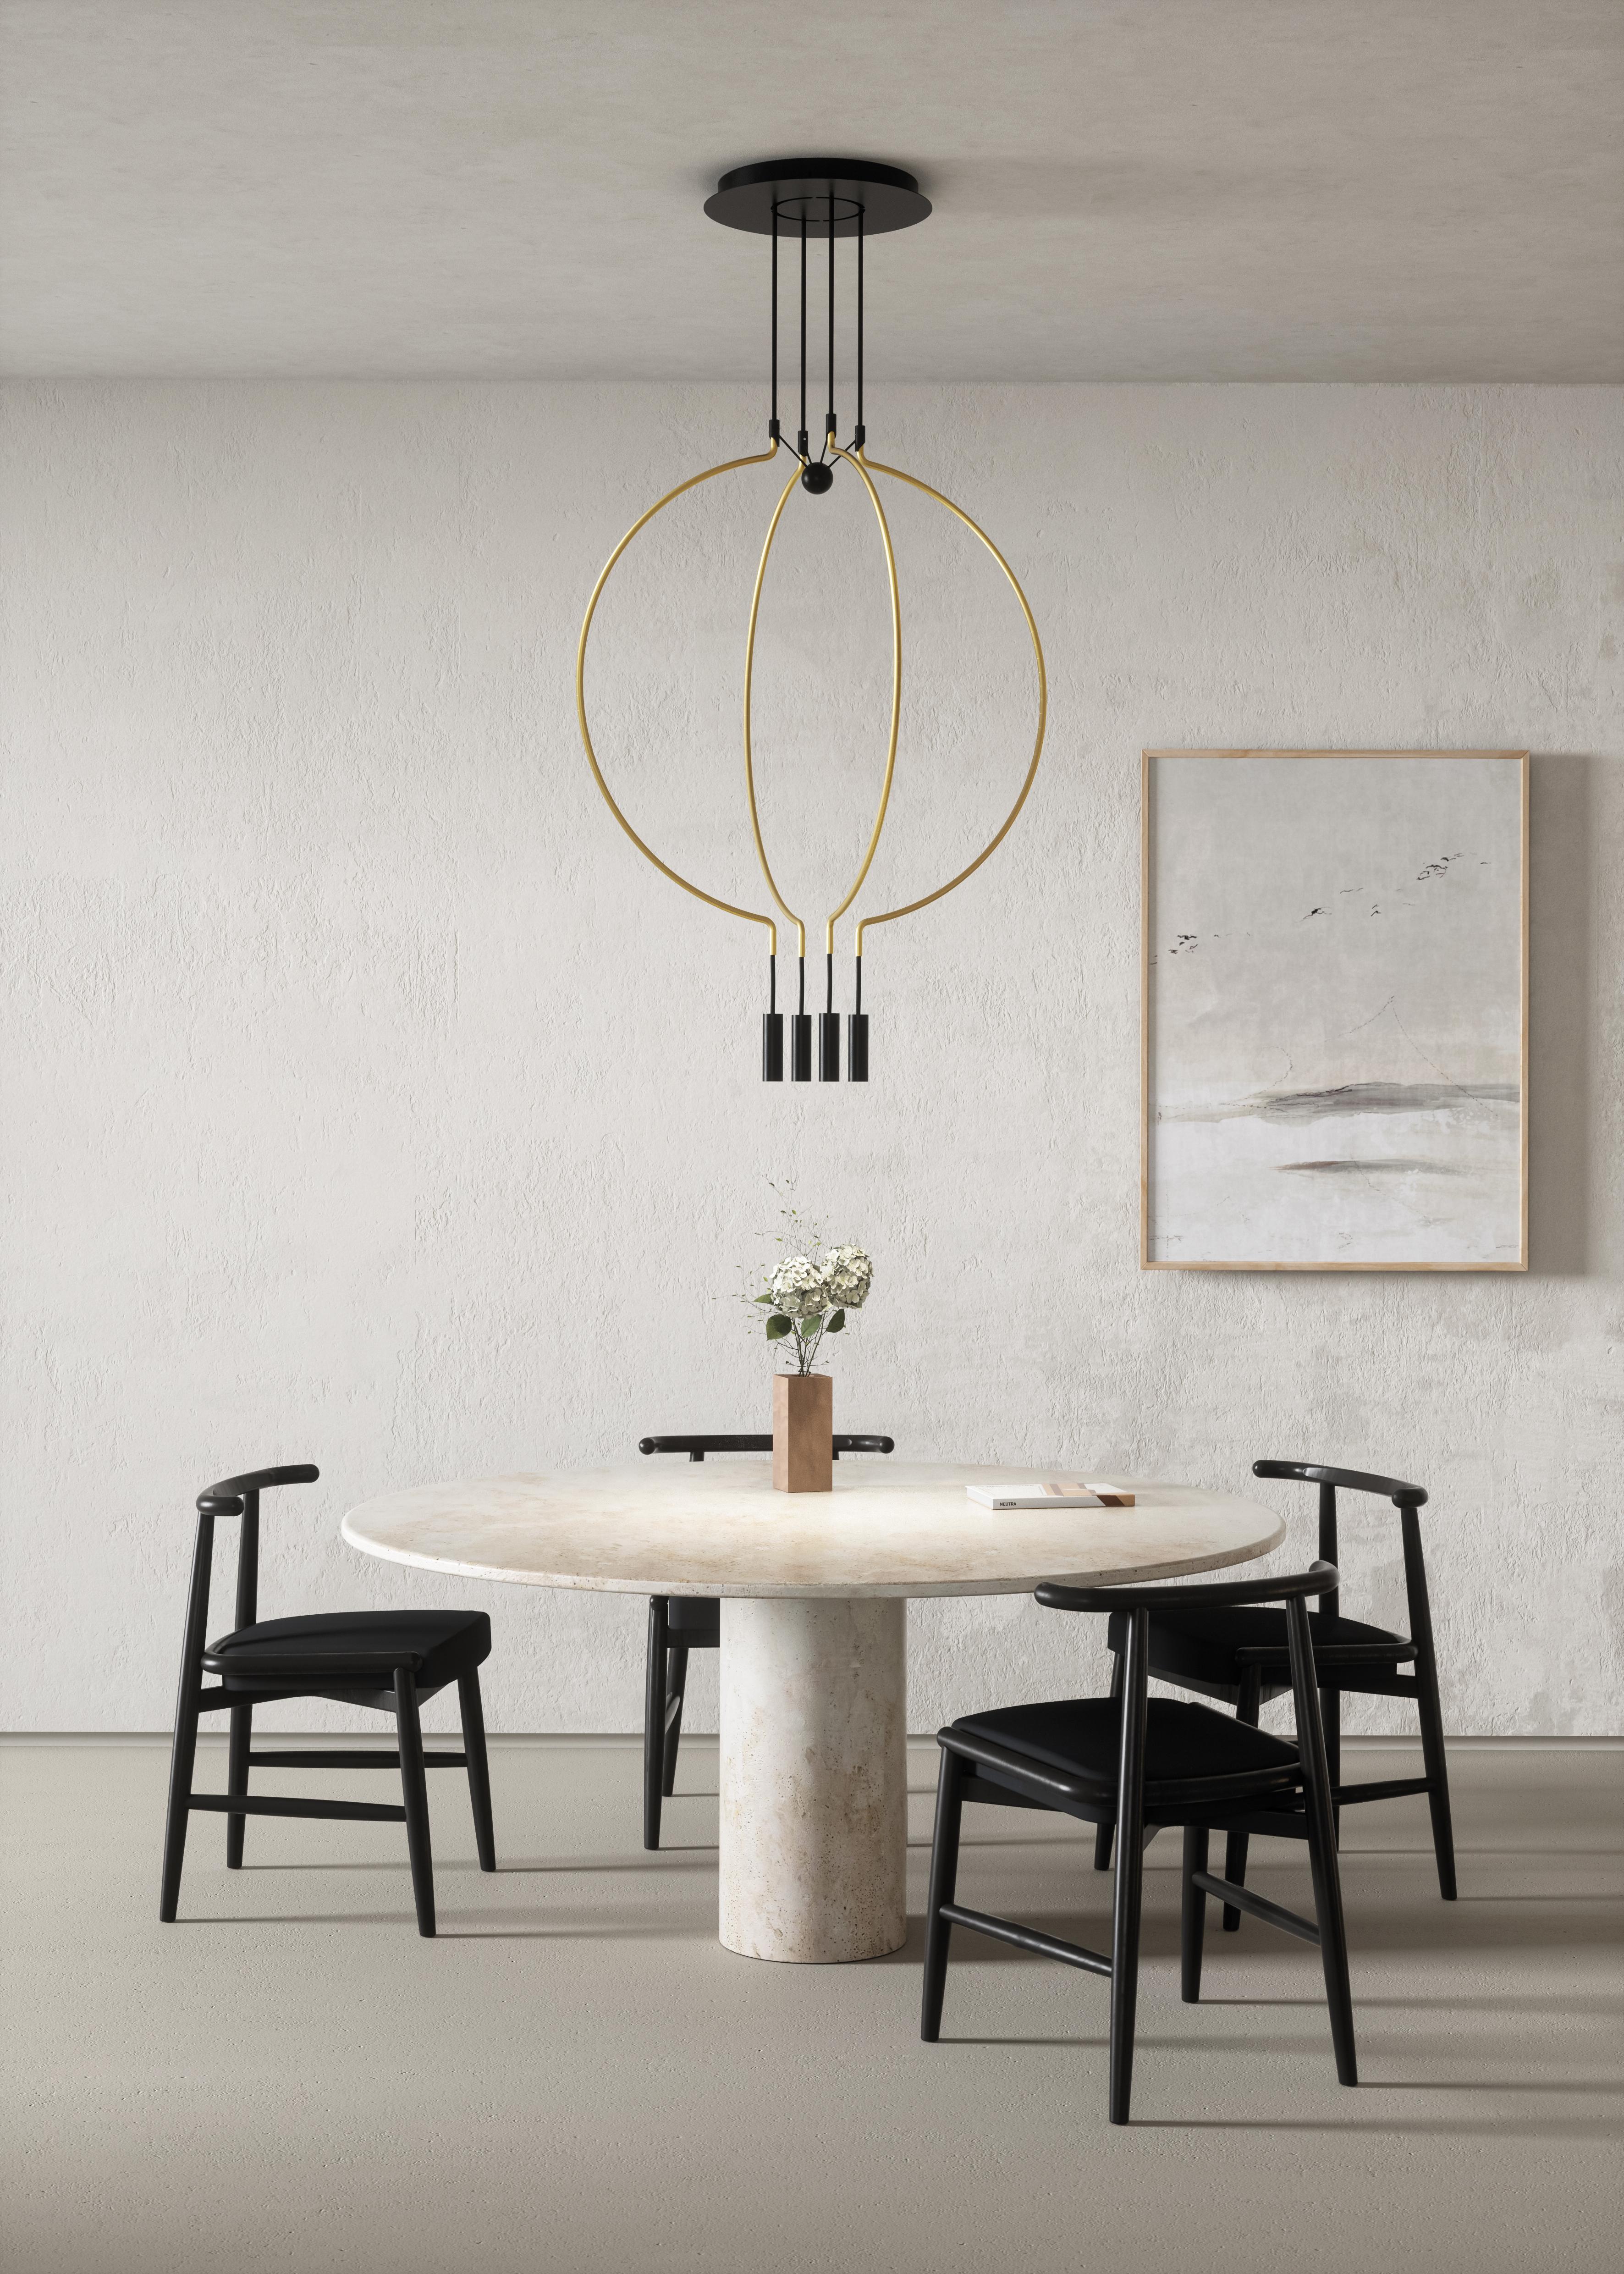 Axolight Liaison Model M8 Pendant Lamp in Black/Gold by Sara Moroni

Modular lightness and elegance. Liaison tells about the perfect balance of three geometric archetypes: sphere, circle and cylinder compose a system that includes the single pendant